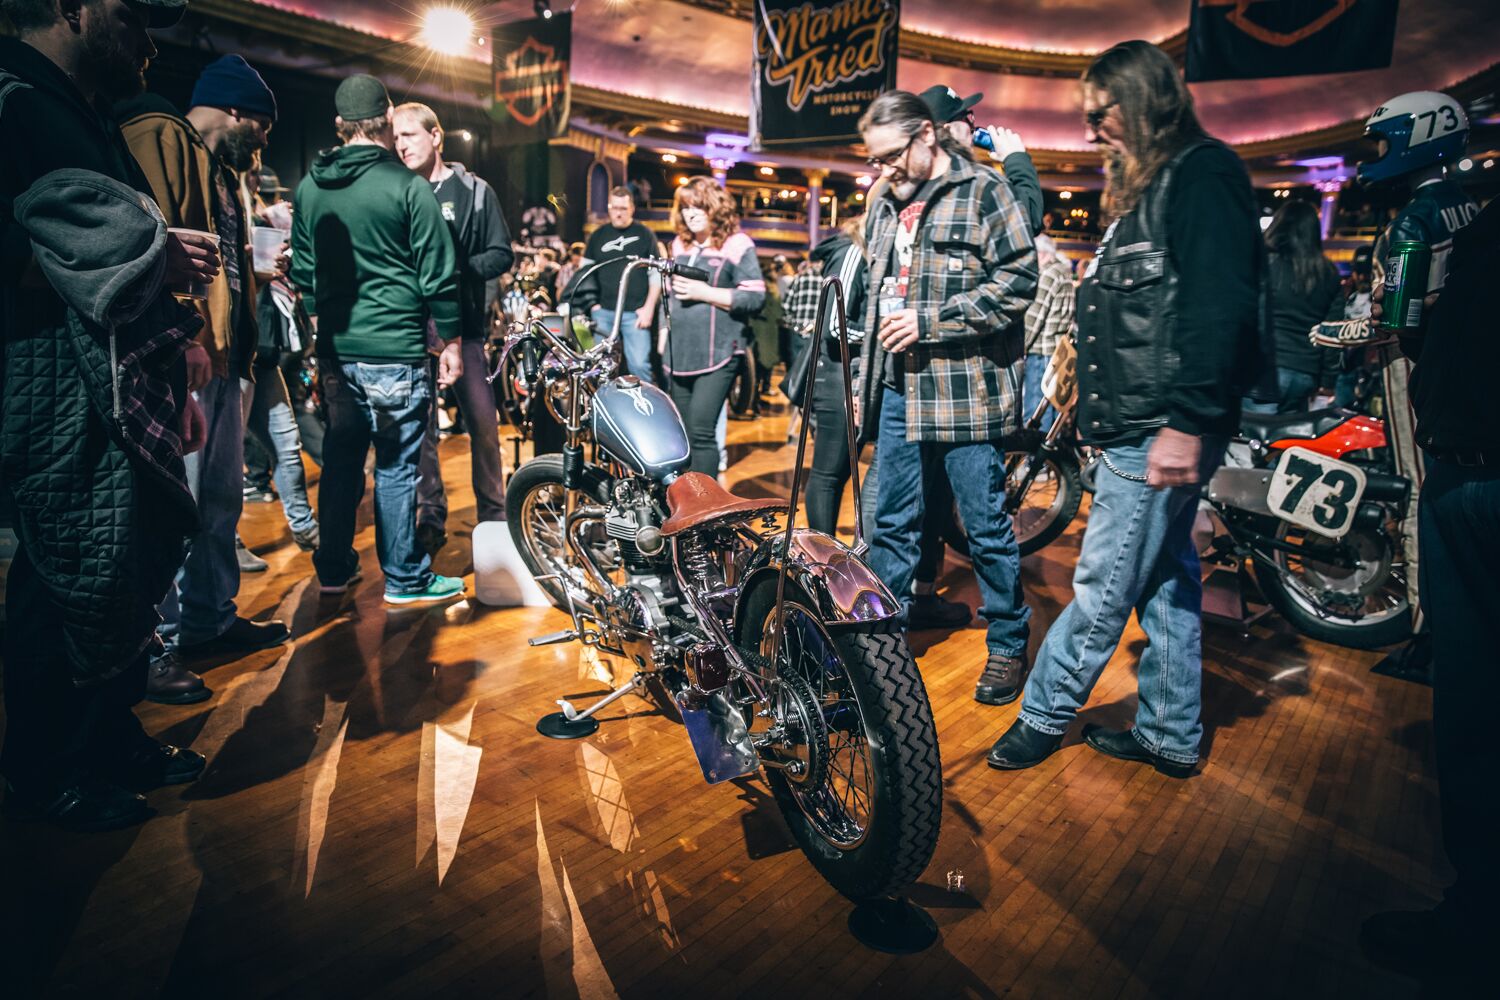 Mama Tried Motorcycle Show on Instagram: This year's Ride In